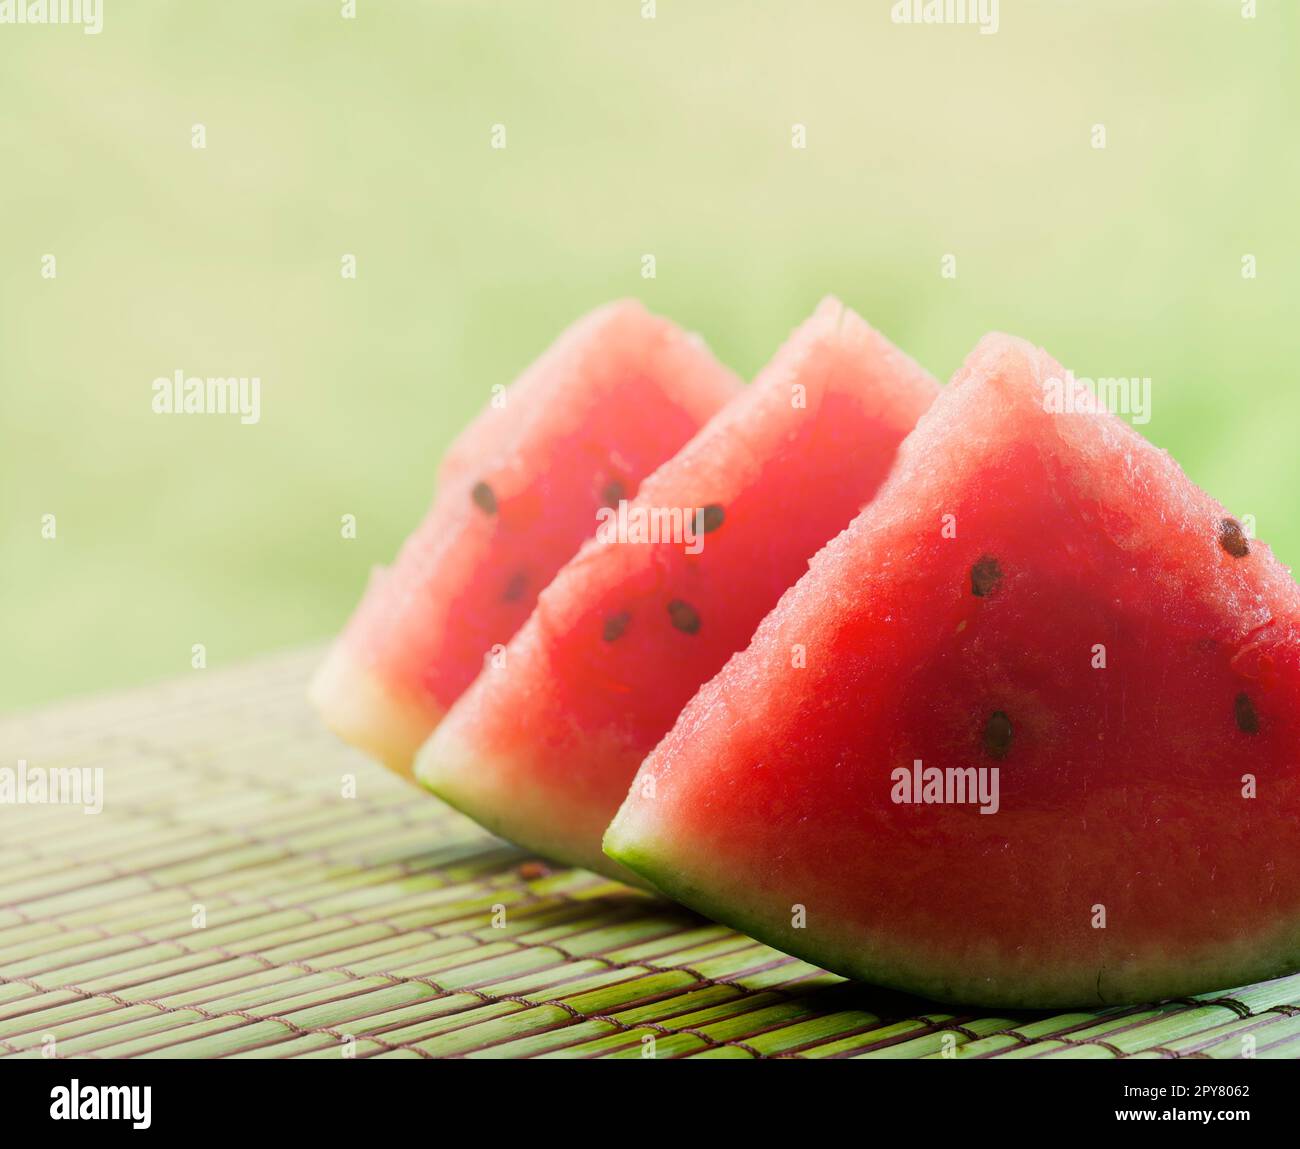 Closeup of sweet red watermelon slices on green table background in garden with sunlight. Stock Photo